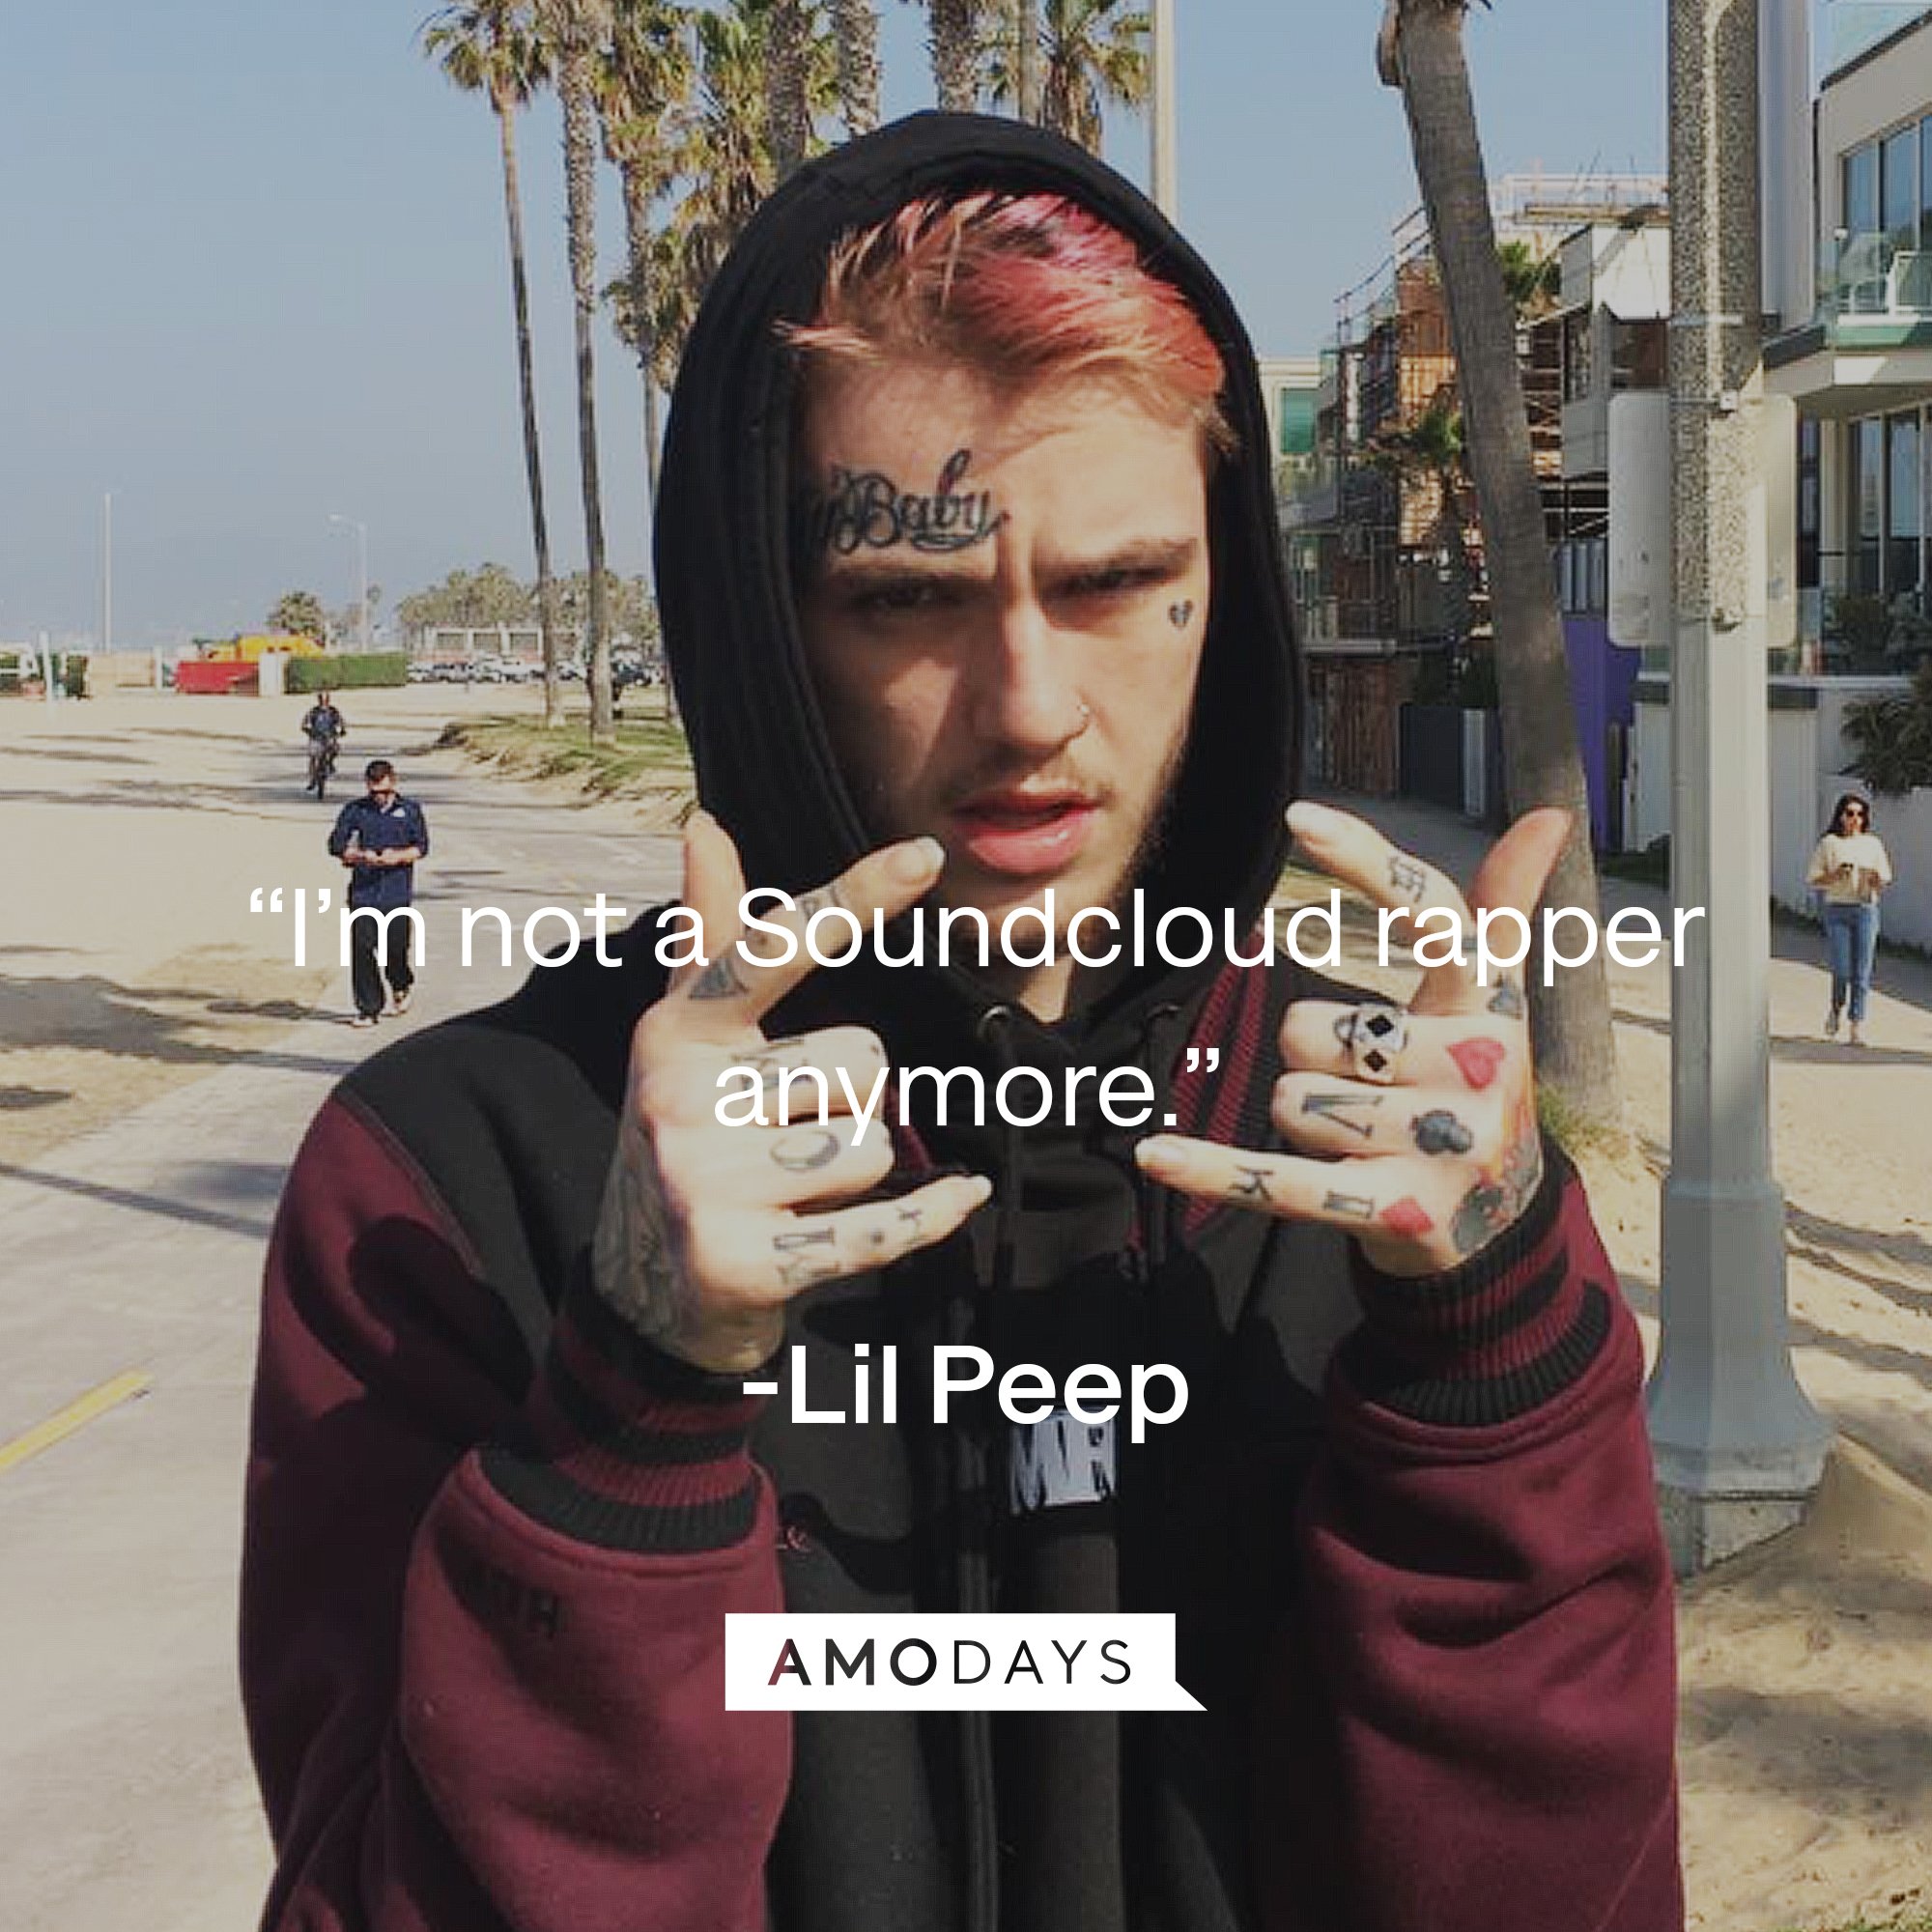 Lil Peep's quote: “I’m not a Soundcloud rapper anymore.” | Image: AmoDays